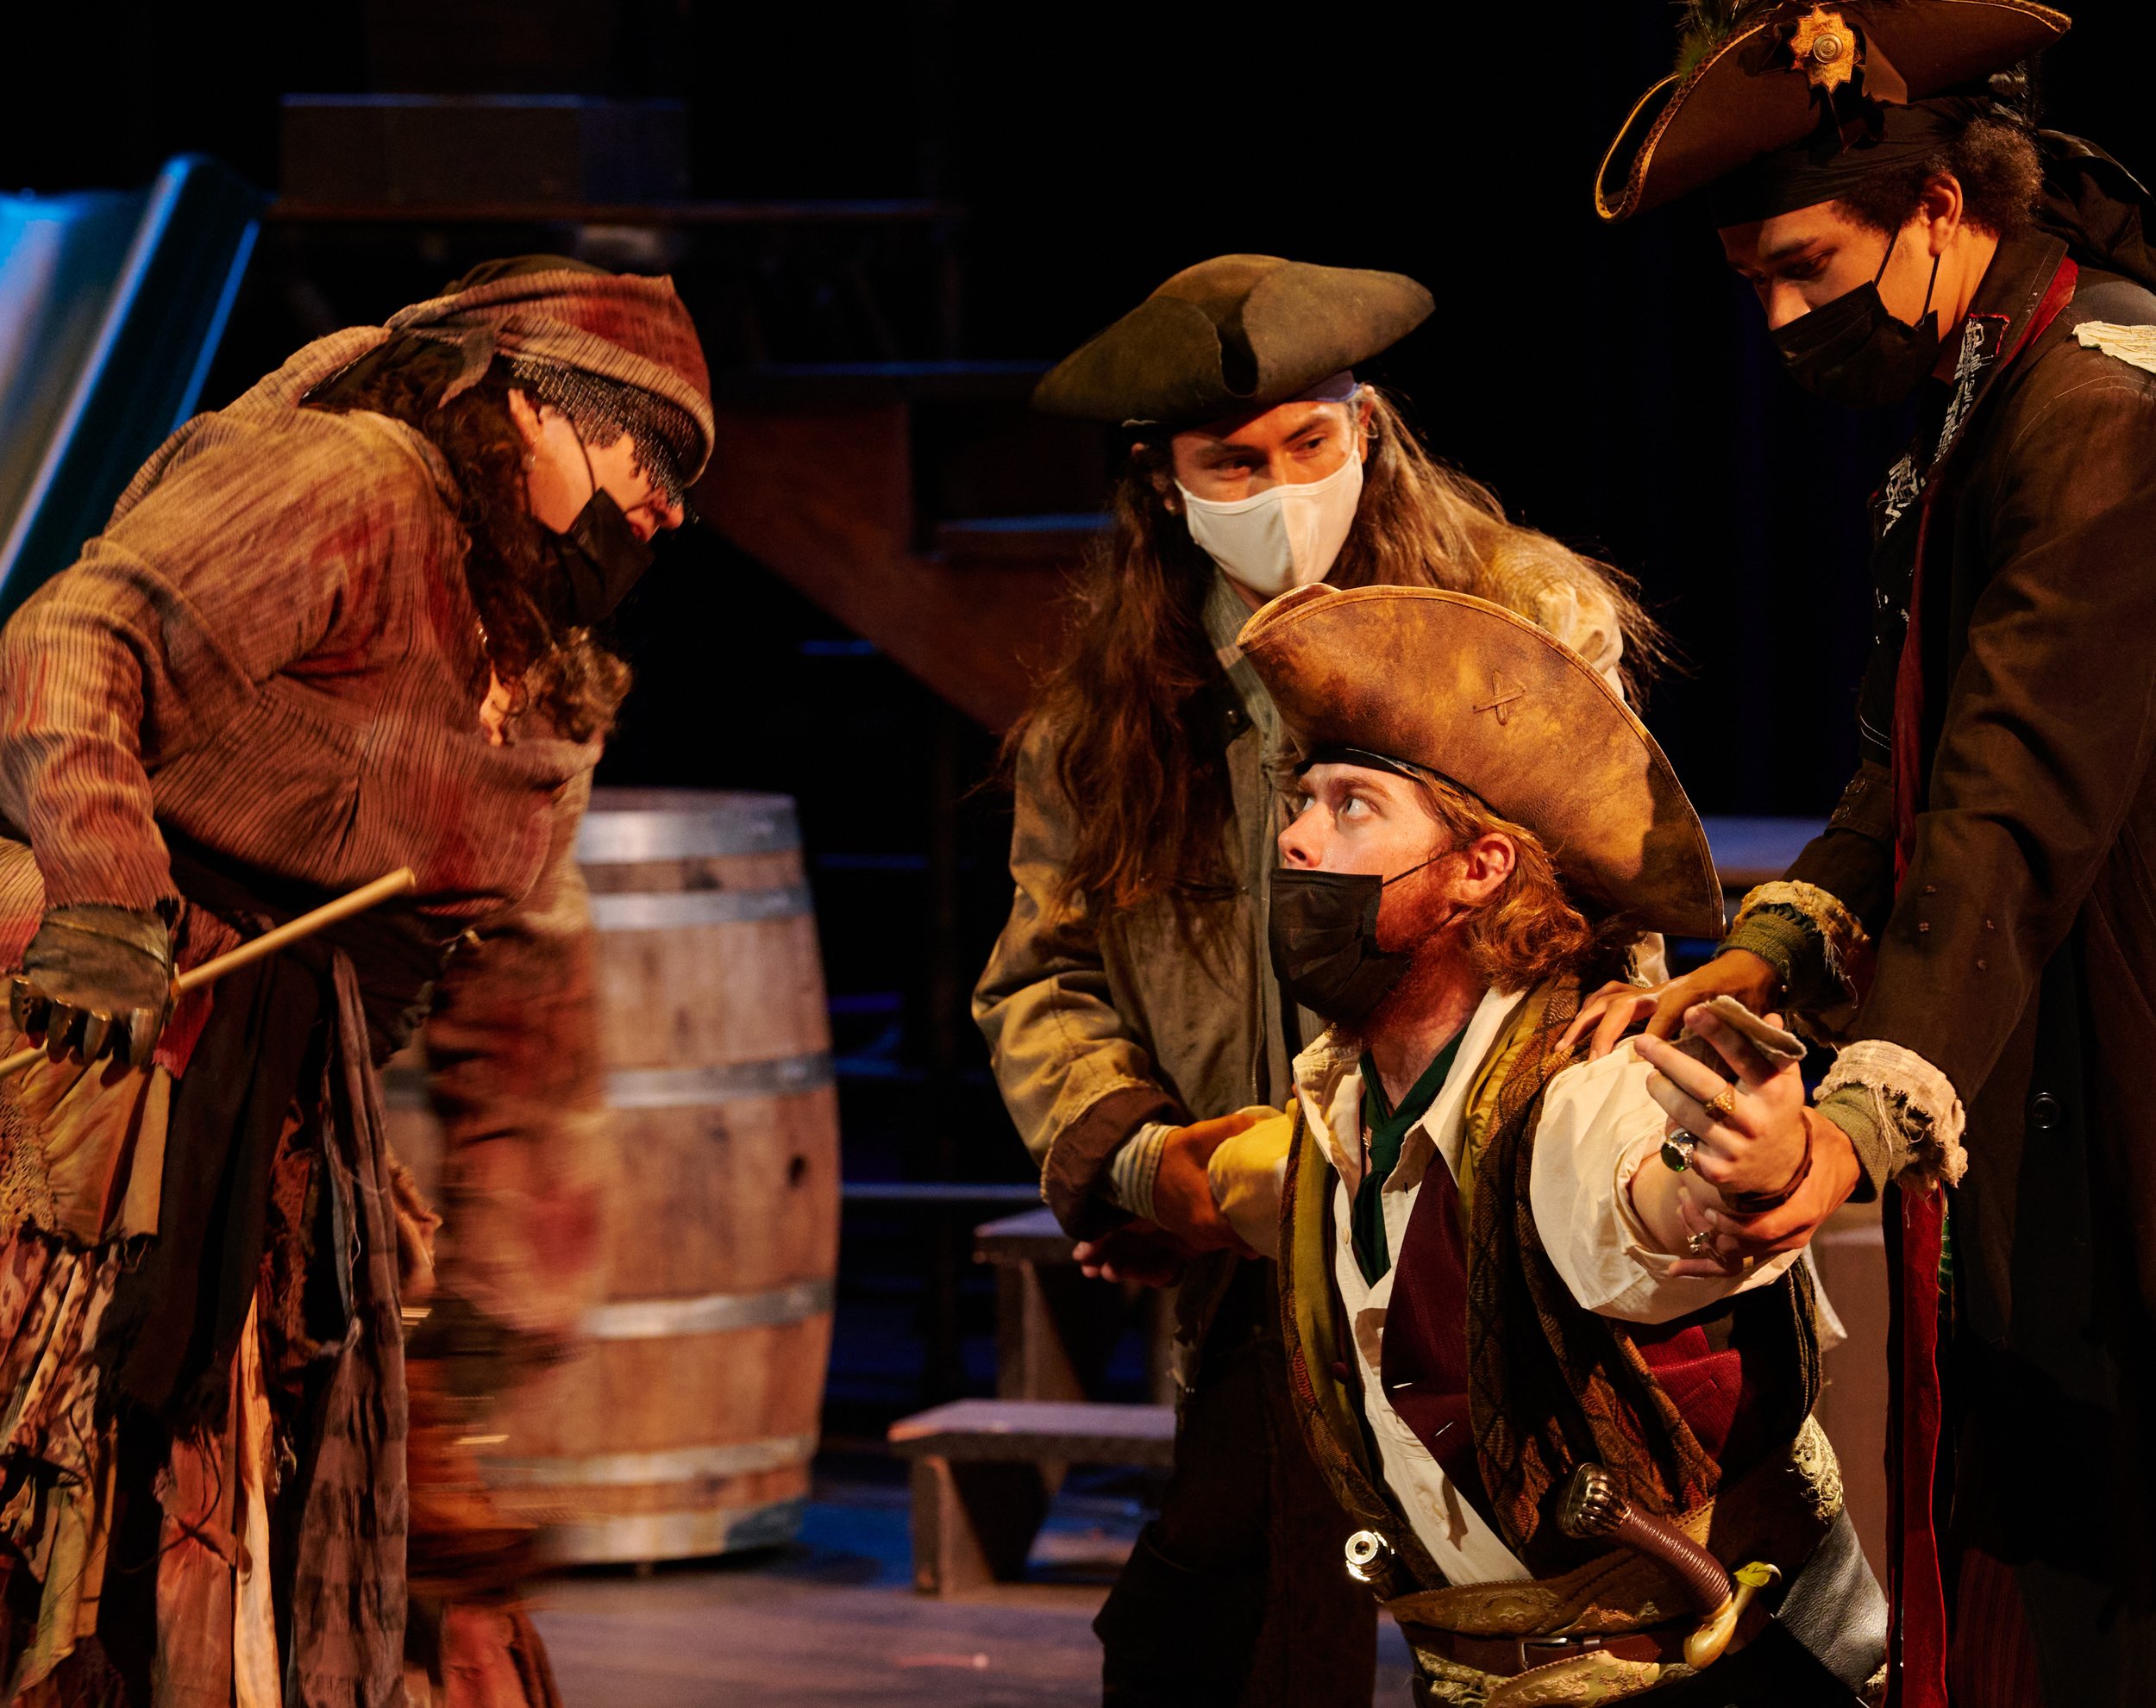  Natalie Garner, Norman Campos, Justin Valine (kneeling), and Carson Jett during rehearsal of the Santa Monica College Theatre Arts production of "Treasure Island" at the SMC Main Stage on Tuesday, May 17, 2022, in Santa Monica, Calif. (Nicholas McCa